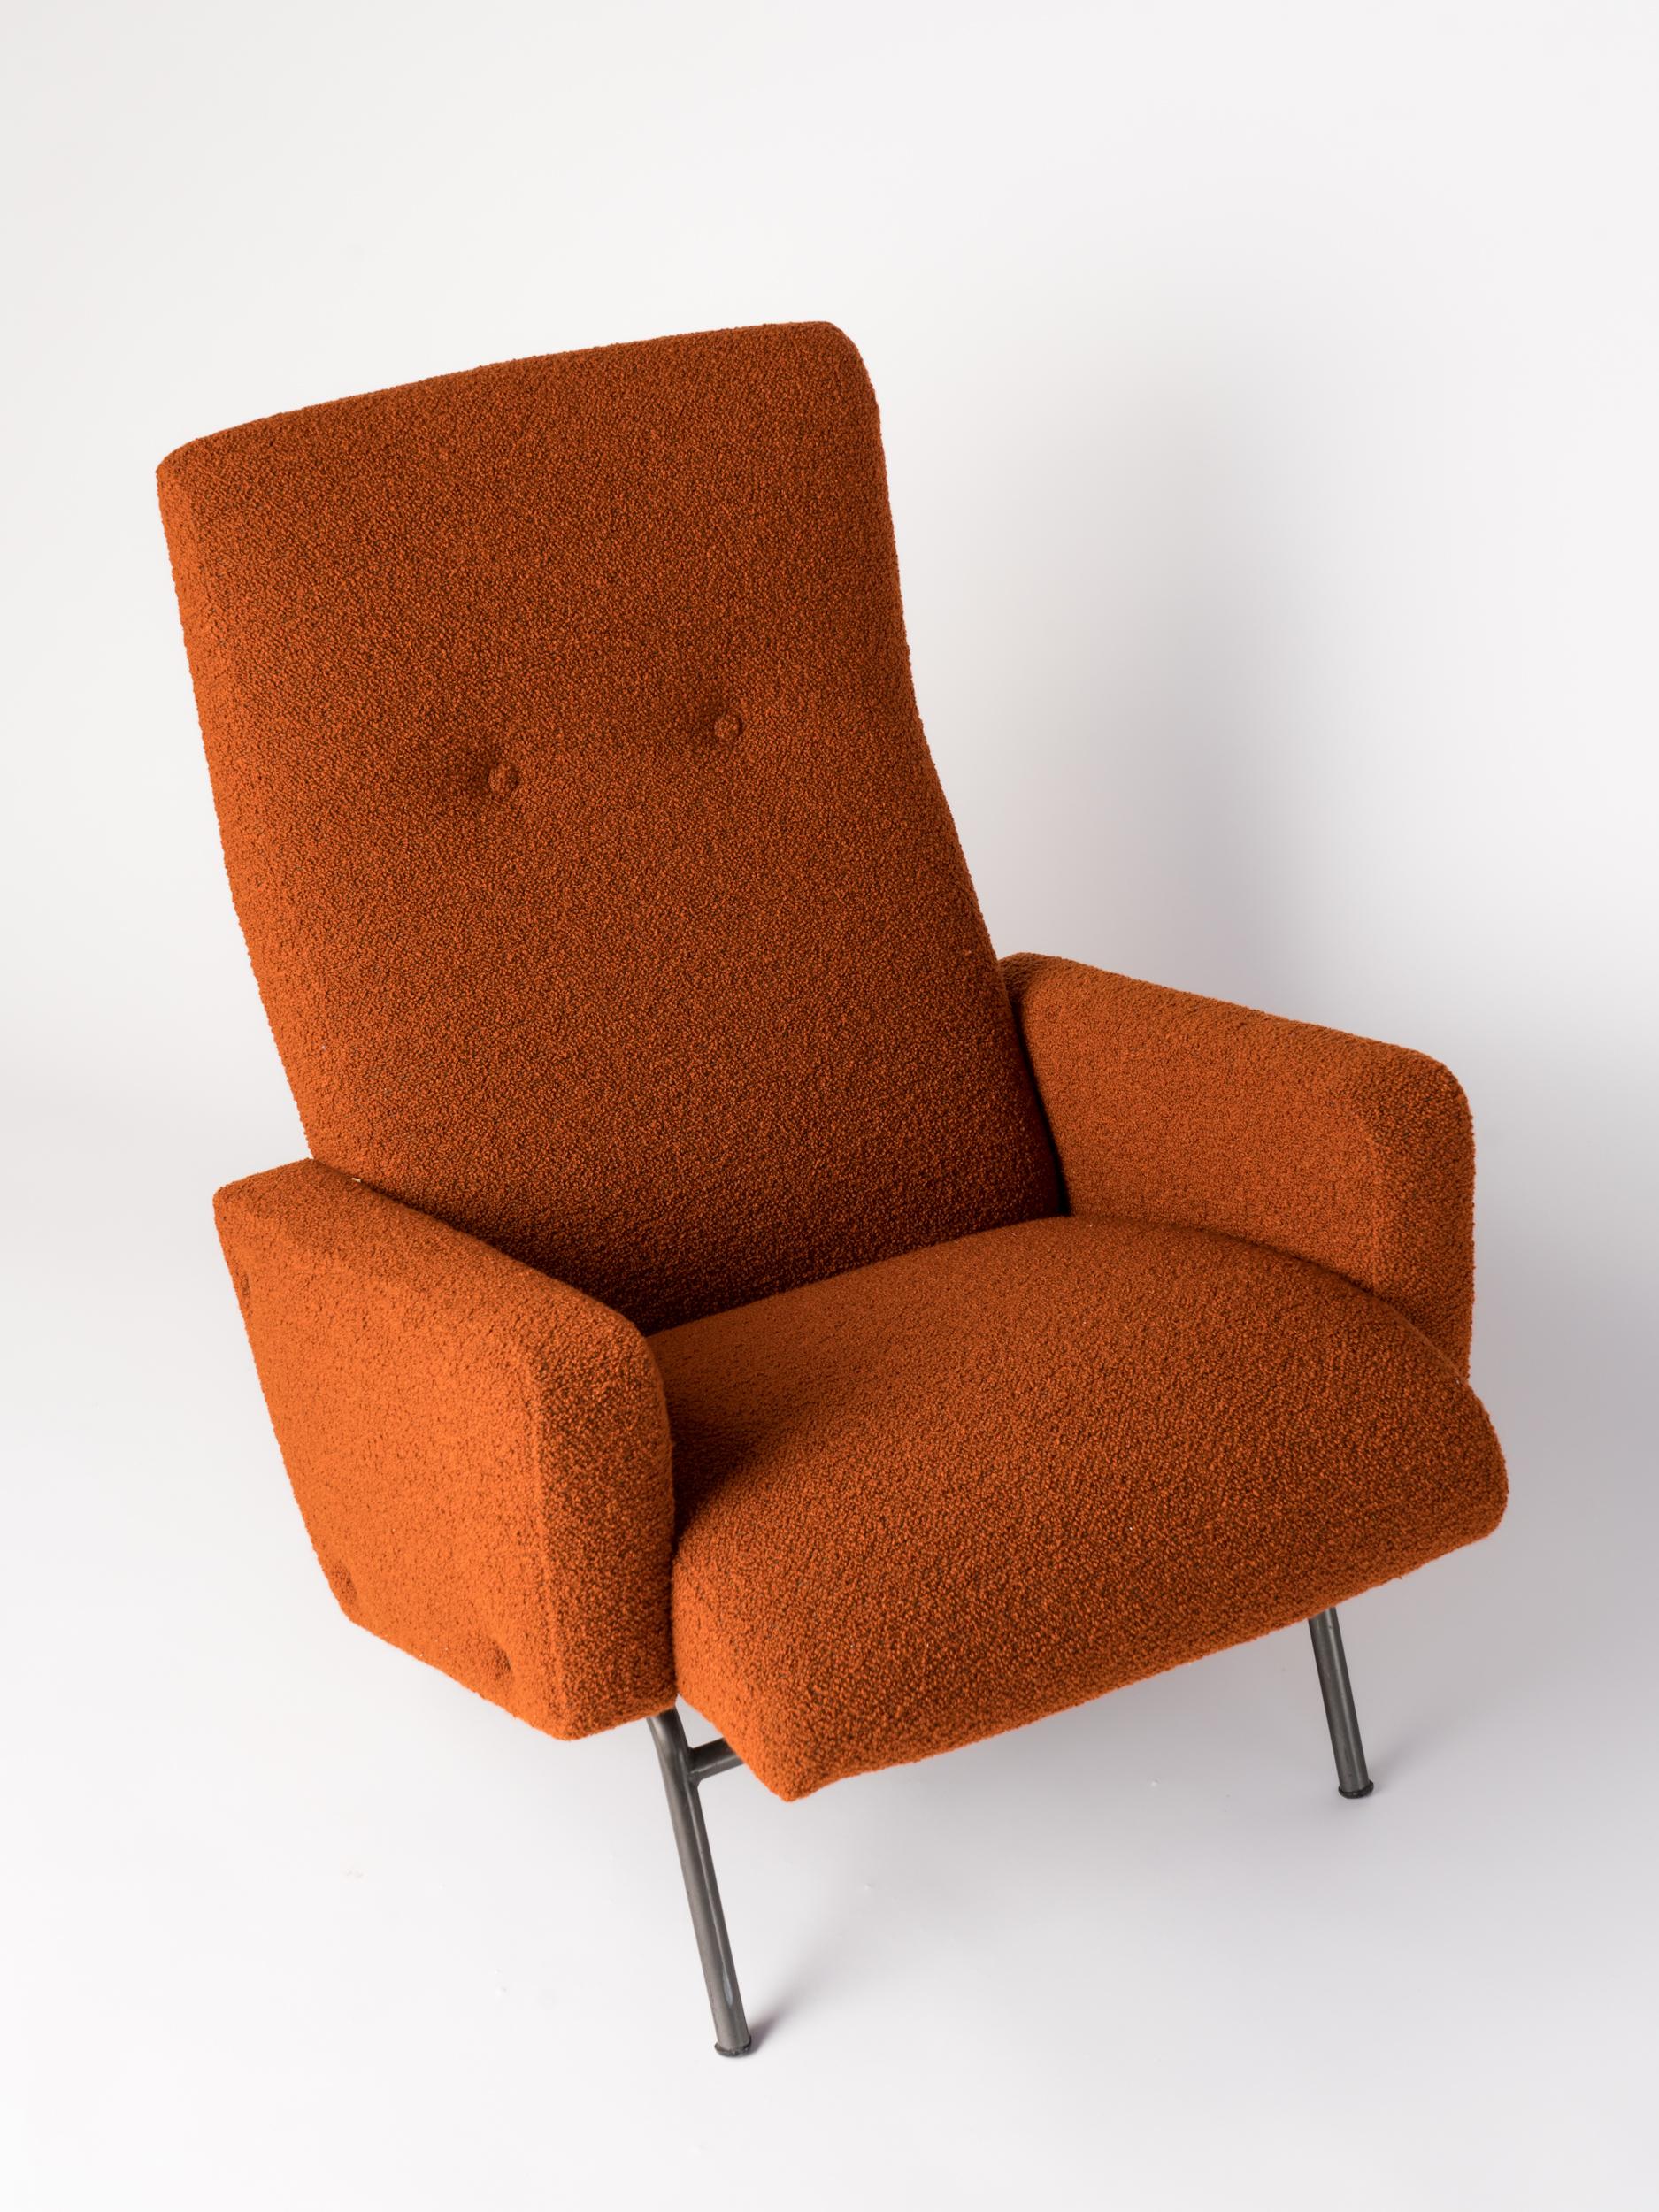 Mid-Century Modern Armchair & Ottoman by Georges Frydman - France 1960's For Sale 2